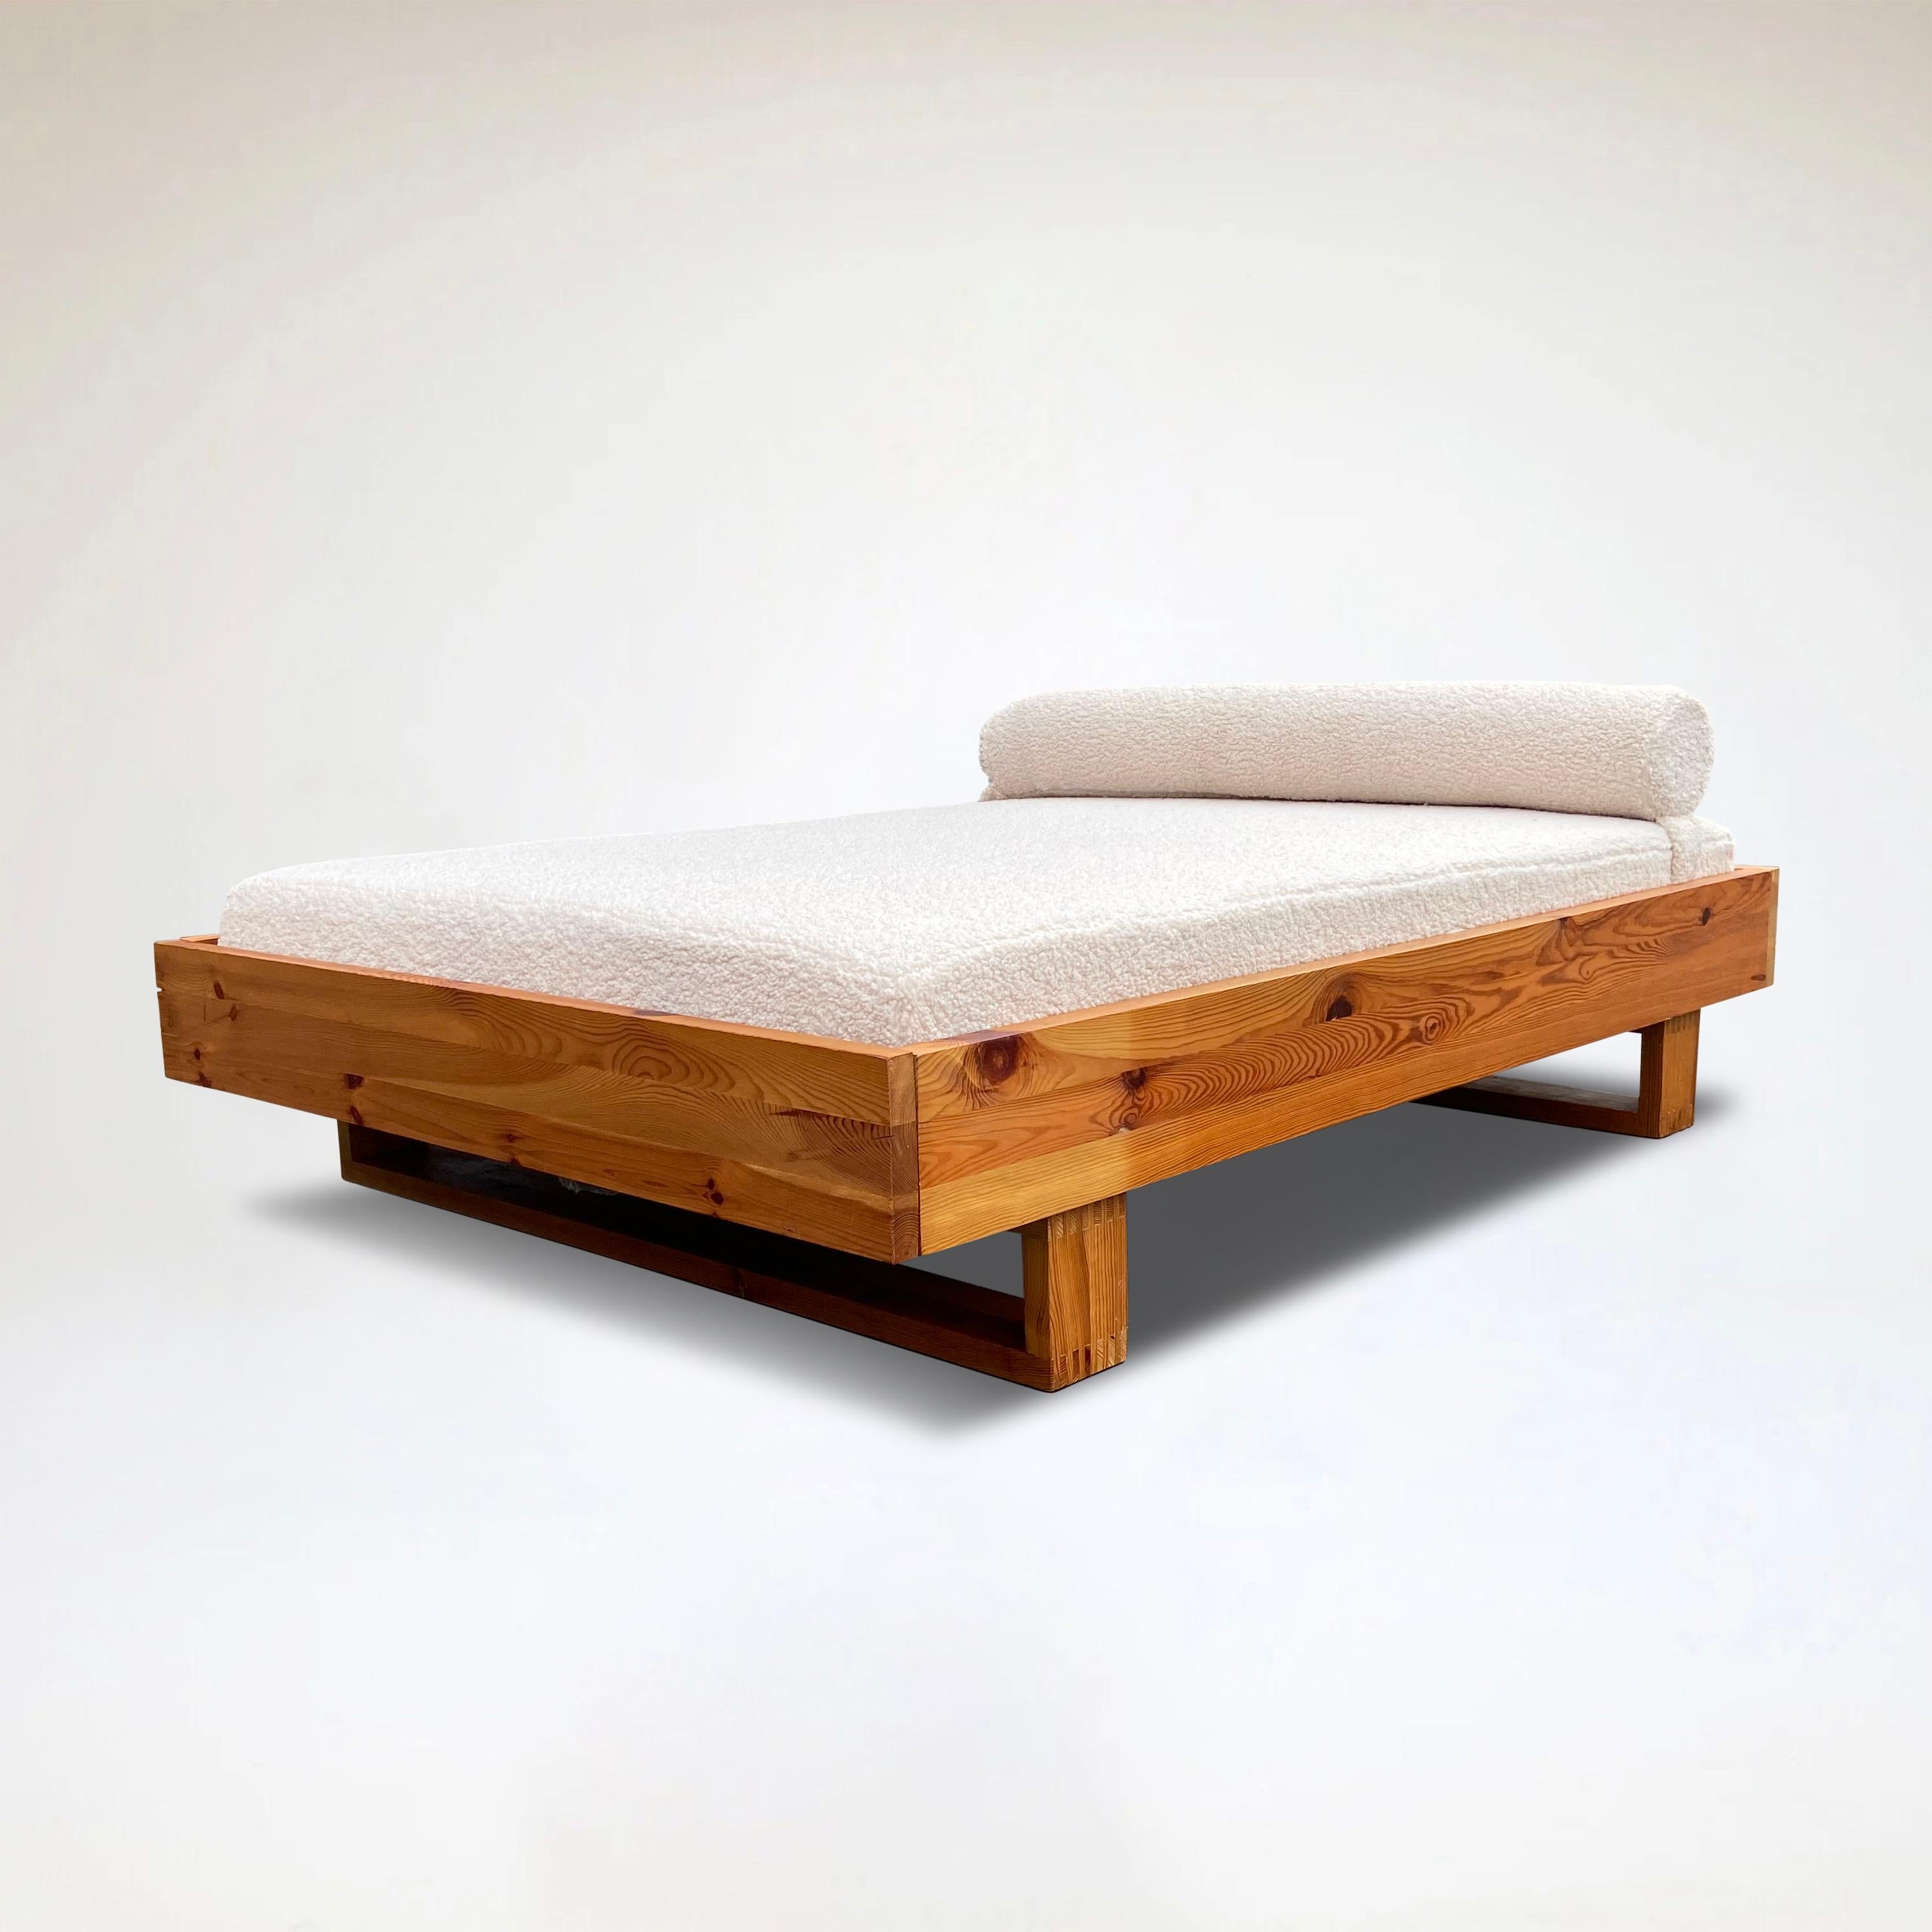 Late 20th Century Modernist pine and bouclé daybed by Ate van Apeldoorn for Houtwerk Hattem 1970s For Sale